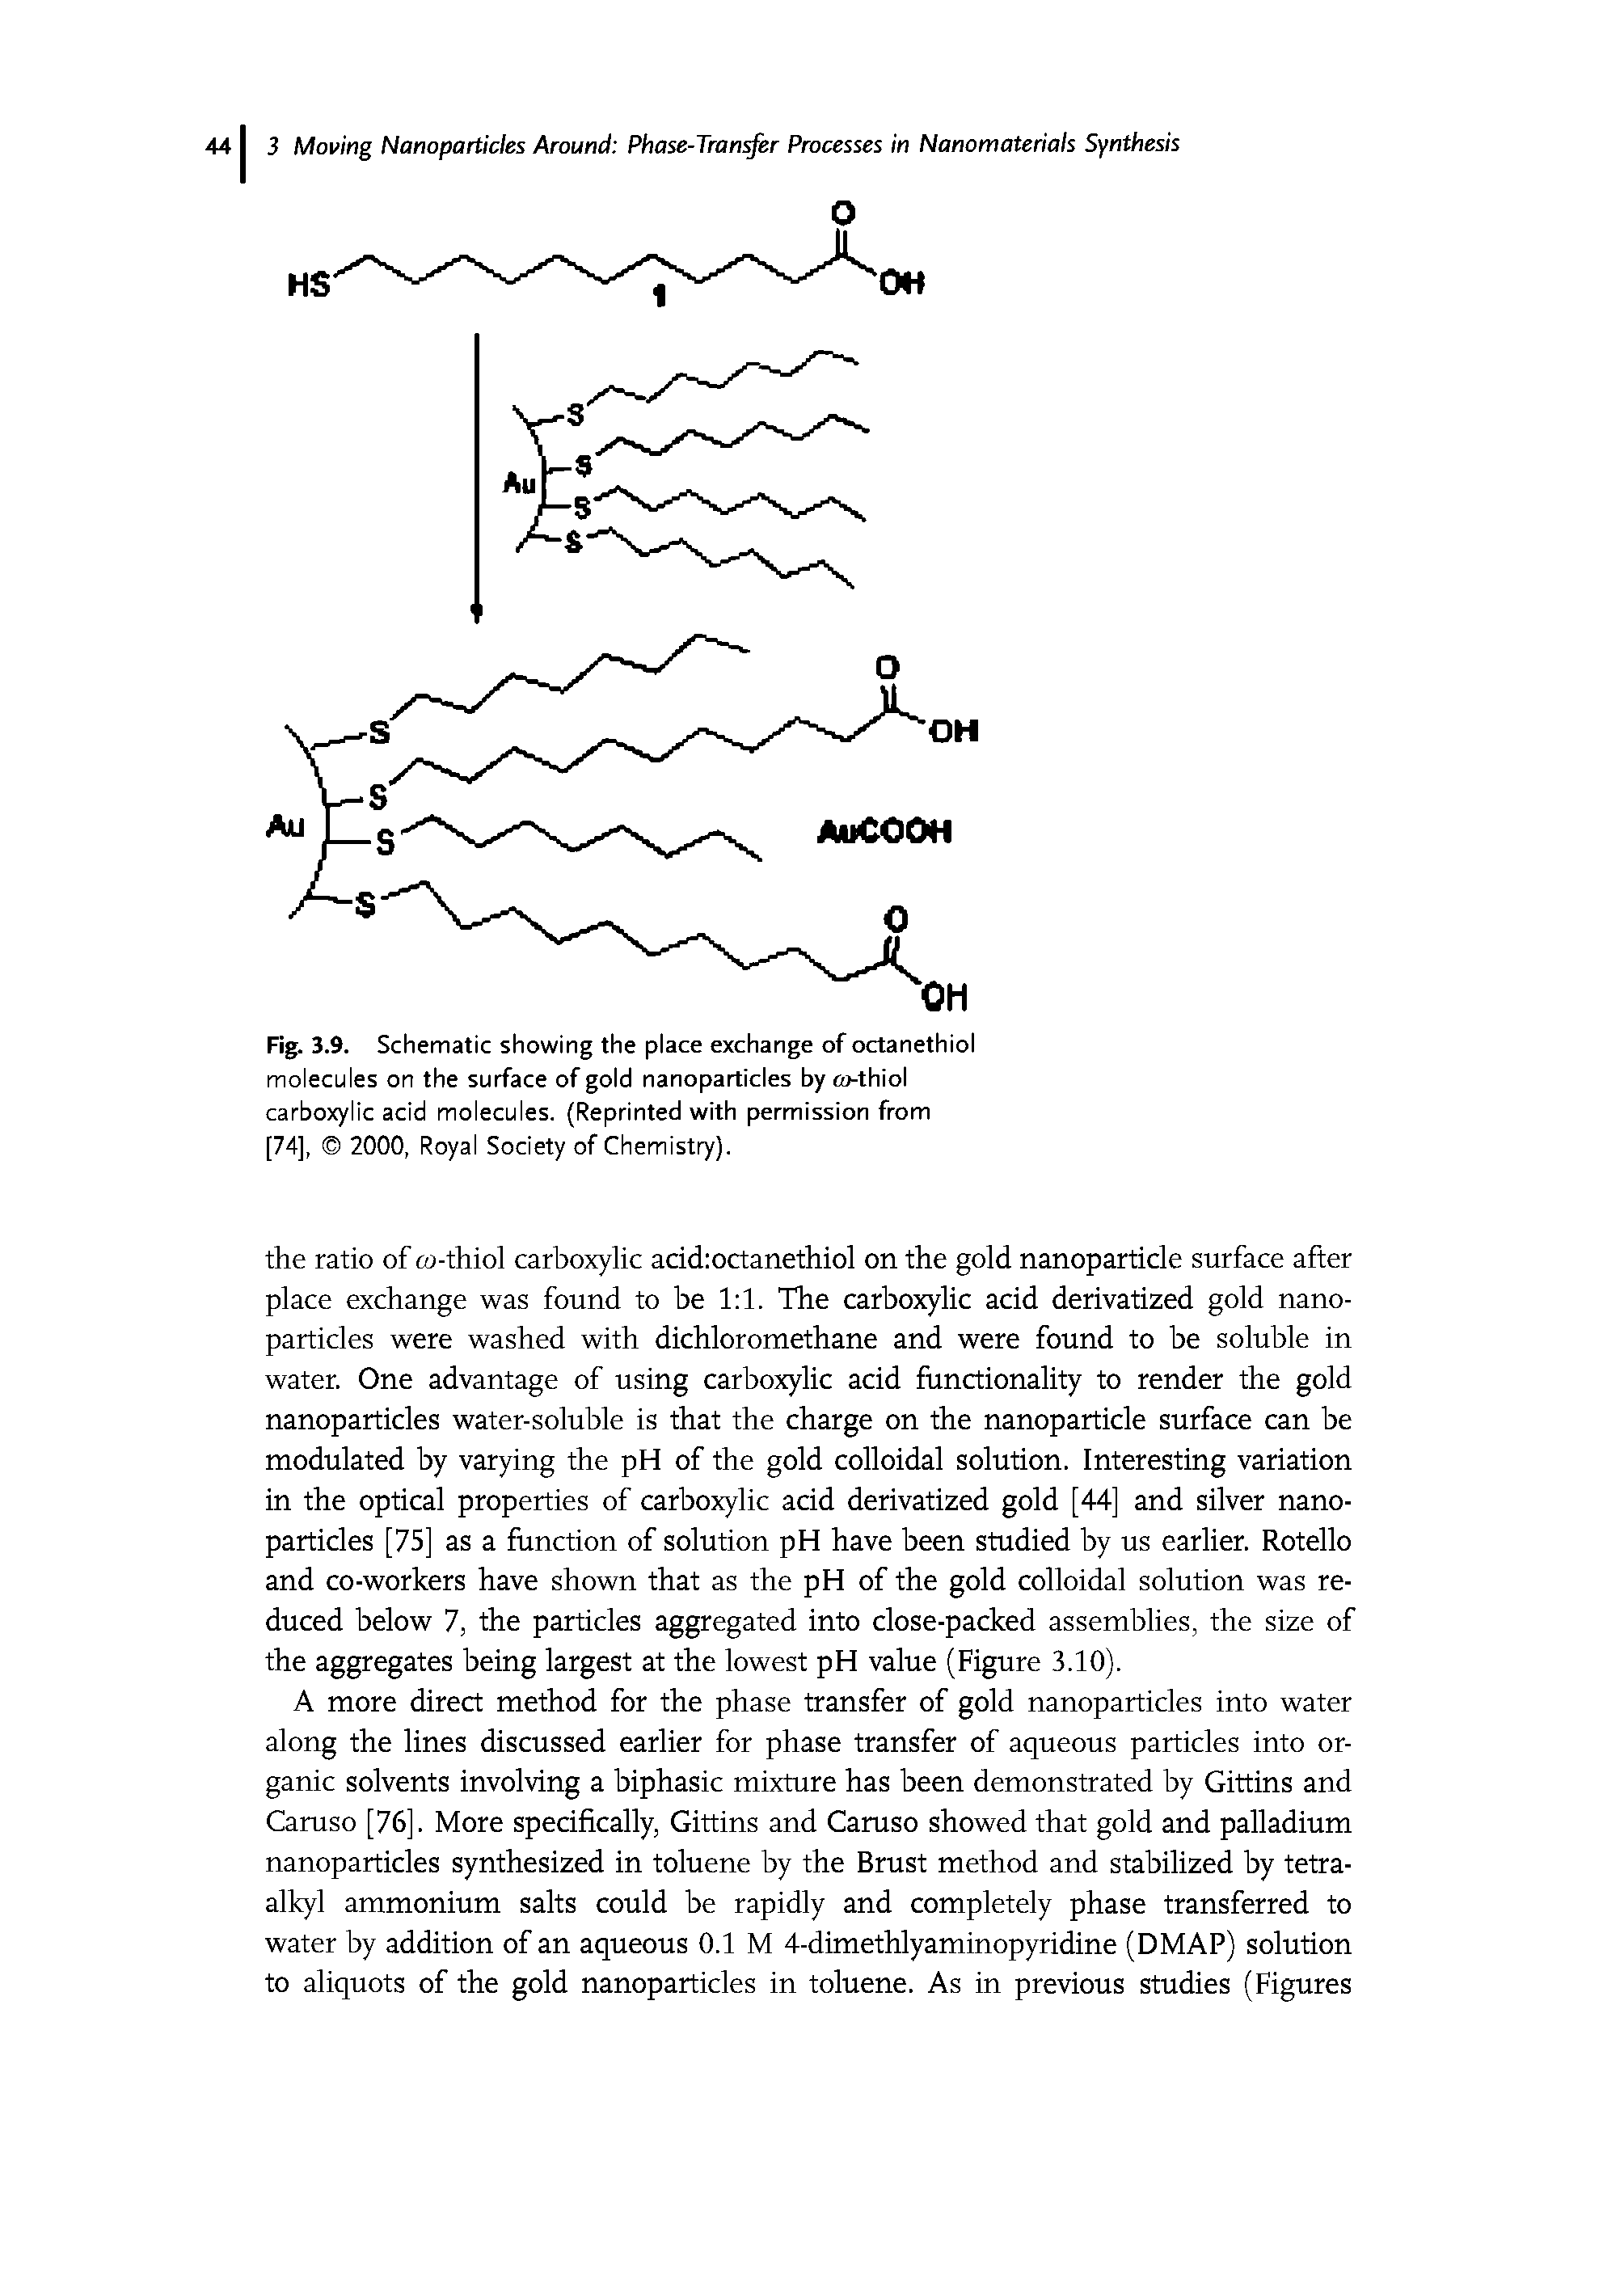 Fig. 3.9. Schematic showing the piace exchange of octanethioi molecules on the surface of gold nanoparticles by co-thiol carboxylic acid molecules. (Reprinted with permission from [74], 2000, Royal Society of Chemistry).